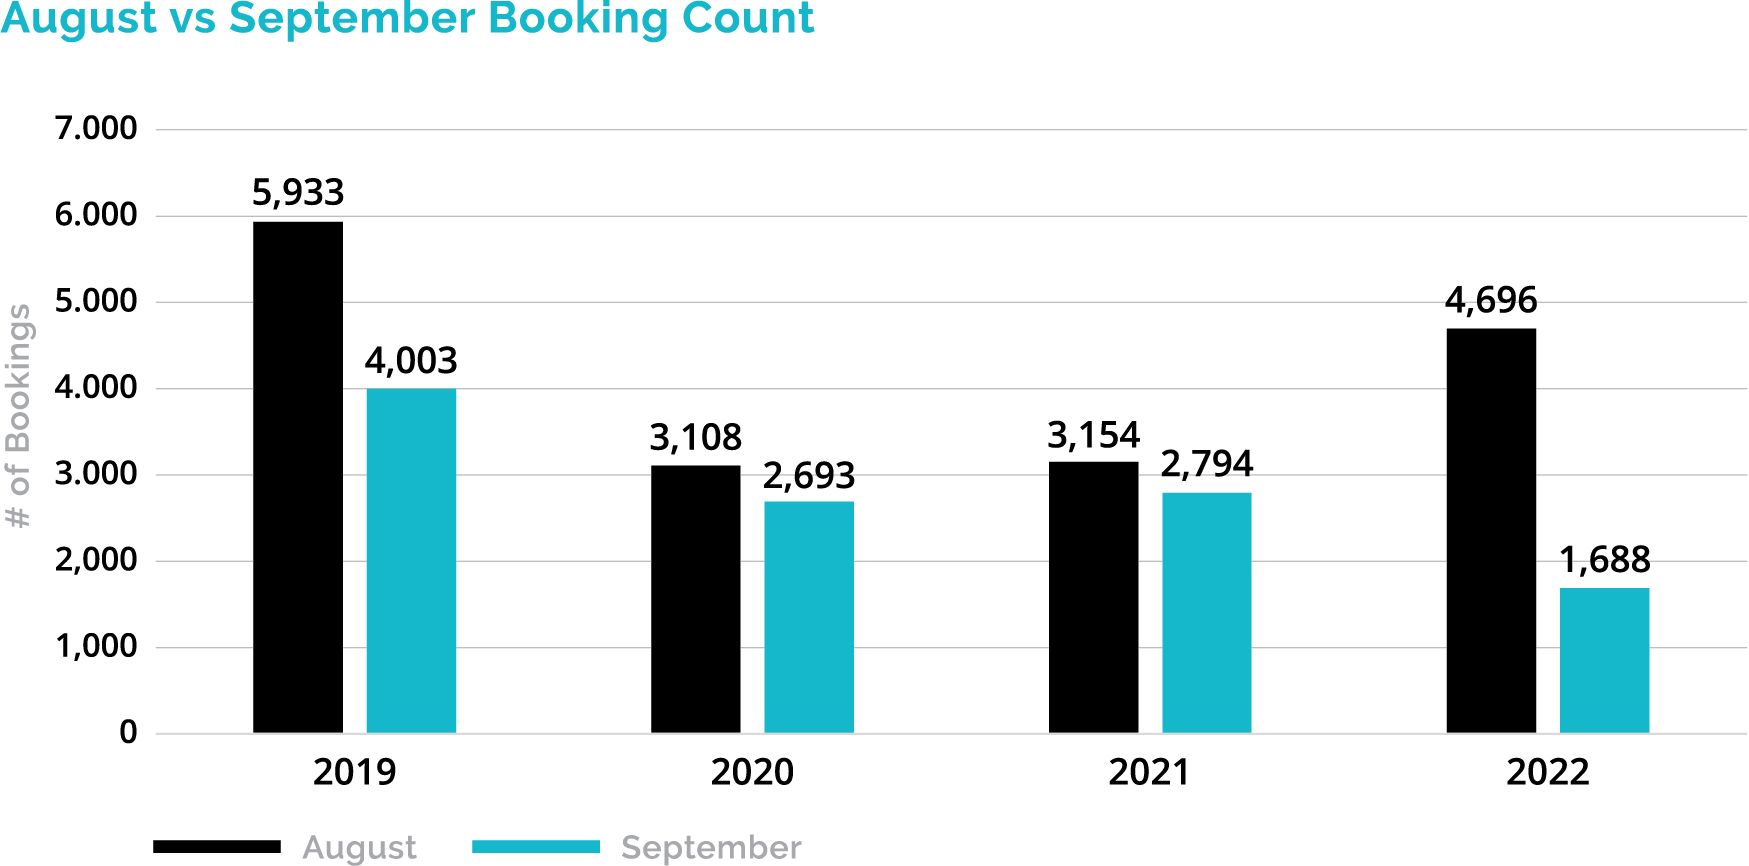 August vs September Booking Count